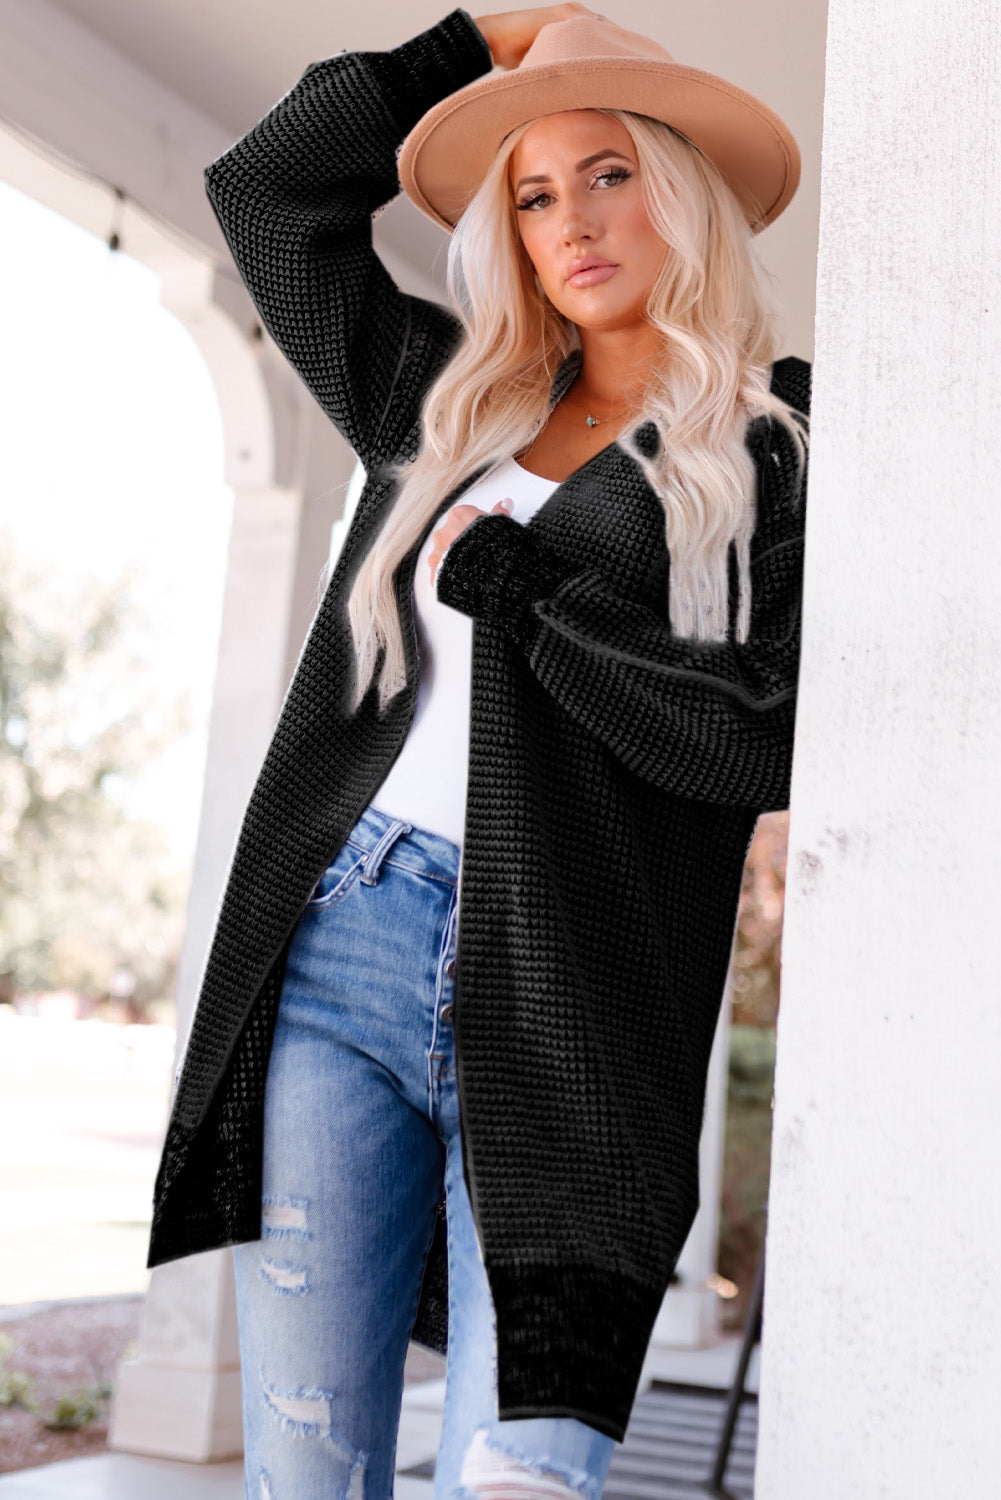 Plaid Knitted Long Open Front Cardigan